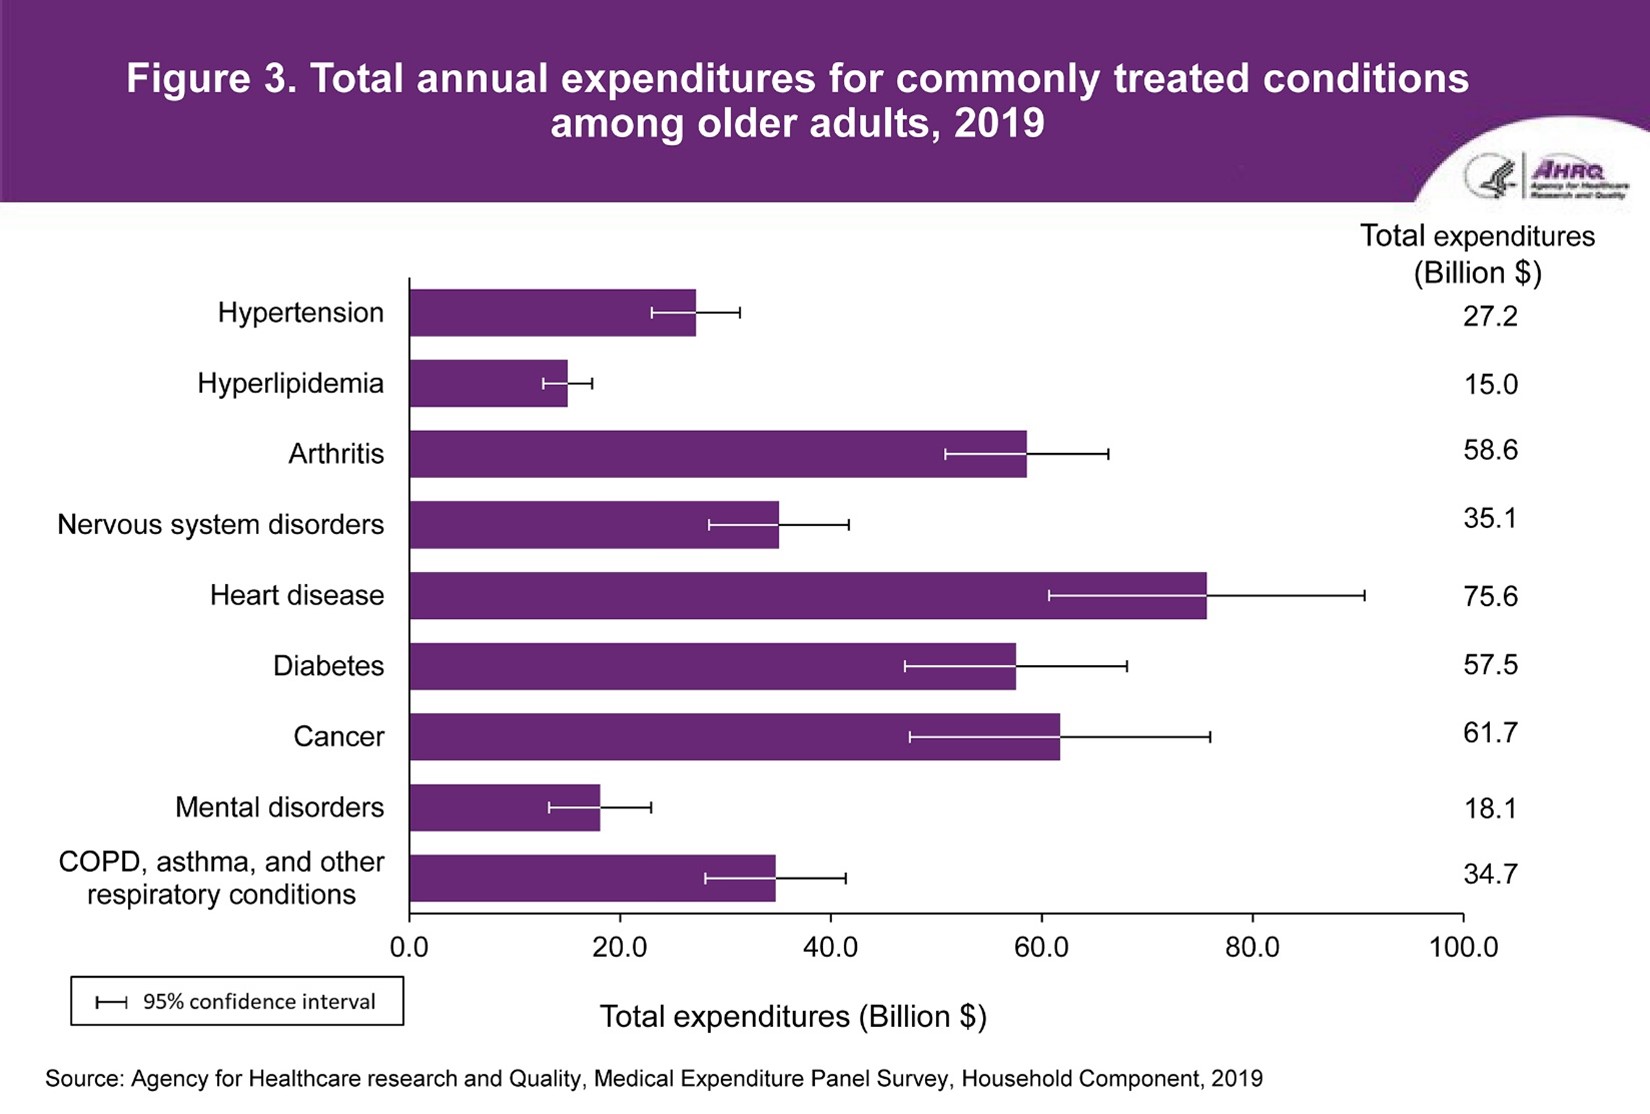 Figure displays: Total annual expenditures for commonly treated conditions among older adults, 2019